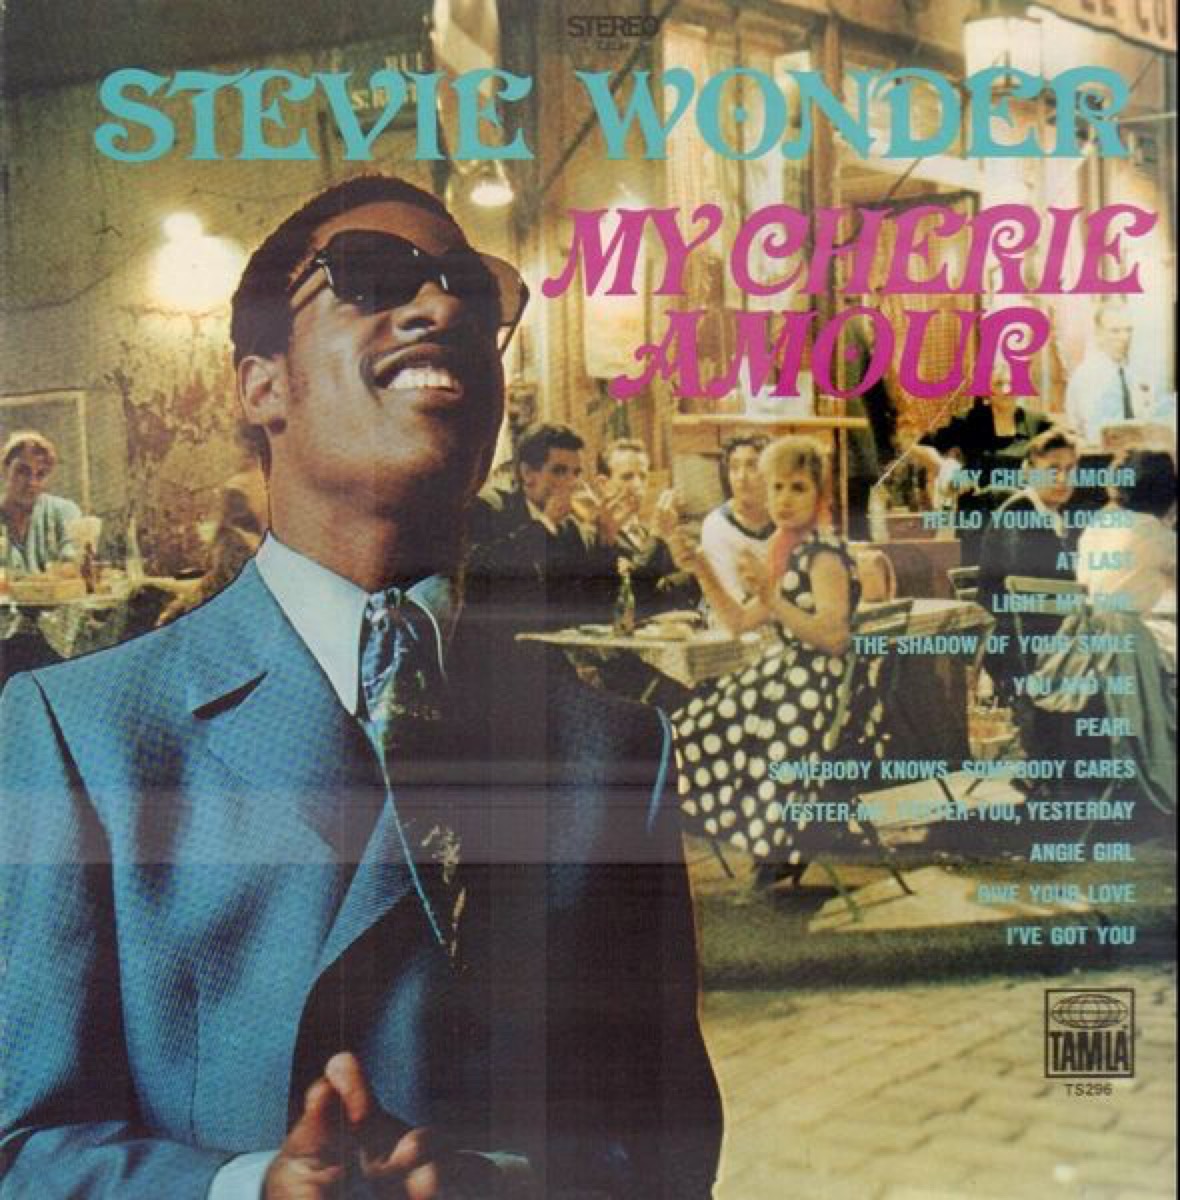 stevie wonder my cherie amour single cover, songs from 50 years ago